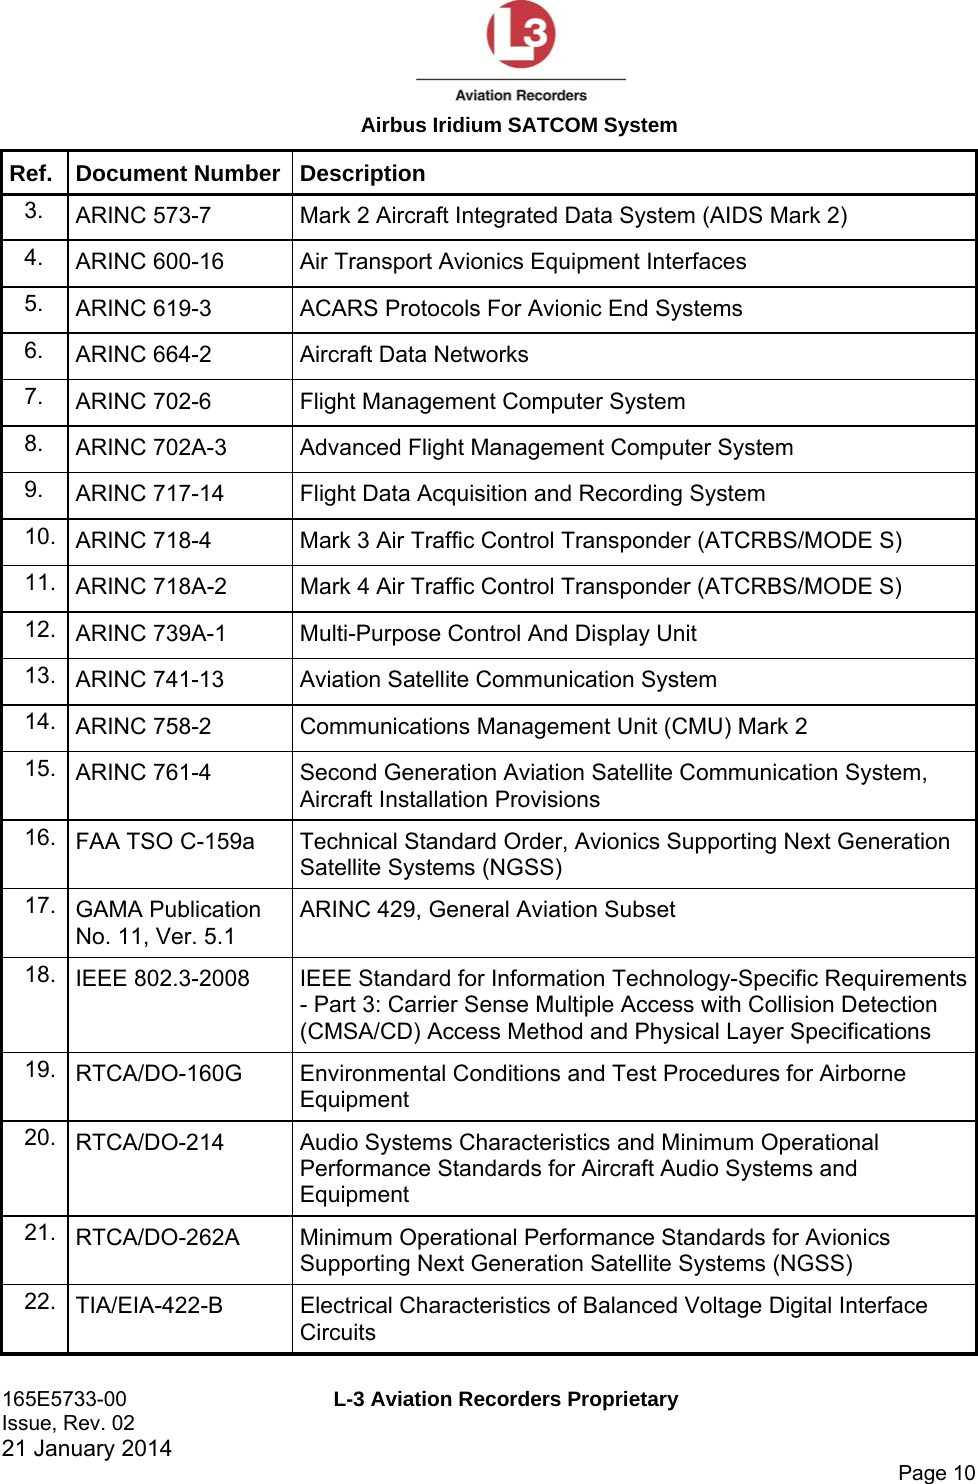  Airbus Iridium SATCOM System 165E5733-00  L-3 Aviation Recorders Proprietary Issue, Rev. 02   21 January 2014      Page 10 Ref. Document Number Description 3.  ARINC 573-7  Mark 2 Aircraft Integrated Data System (AIDS Mark 2) 4.  ARINC 600-16  Air Transport Avionics Equipment Interfaces 5.  ARINC 619-3  ACARS Protocols For Avionic End Systems 6.  ARINC 664-2  Aircraft Data Networks 7.  ARINC 702-6  Flight Management Computer System 8.  ARINC 702A-3  Advanced Flight Management Computer System 9.  ARINC 717-14  Flight Data Acquisition and Recording System 10.  ARINC 718-4  Mark 3 Air Traffic Control Transponder (ATCRBS/MODE S) 11.  ARINC 718A-2  Mark 4 Air Traffic Control Transponder (ATCRBS/MODE S) 12.  ARINC 739A-1  Multi-Purpose Control And Display Unit 13.  ARINC 741-13  Aviation Satellite Communication System 14.  ARINC 758-2  Communications Management Unit (CMU) Mark 2 15.  ARINC 761-4  Second Generation Aviation Satellite Communication System, Aircraft Installation Provisions 16.  FAA TSO C-159a  Technical Standard Order, Avionics Supporting Next Generation Satellite Systems (NGSS) 17.  GAMA Publication No. 11, Ver. 5.1 ARINC 429, General Aviation Subset 18.  IEEE 802.3-2008  IEEE Standard for Information Technology-Specific Requirements - Part 3: Carrier Sense Multiple Access with Collision Detection (CMSA/CD) Access Method and Physical Layer Specifications 19.  RTCA/DO-160G  Environmental Conditions and Test Procedures for Airborne Equipment 20.  RTCA/DO-214  Audio Systems Characteristics and Minimum Operational Performance Standards for Aircraft Audio Systems and Equipment 21.  RTCA/DO-262A  Minimum Operational Performance Standards for Avionics Supporting Next Generation Satellite Systems (NGSS) 22.  TIA/EIA-422-B  Electrical Characteristics of Balanced Voltage Digital Interface Circuits 